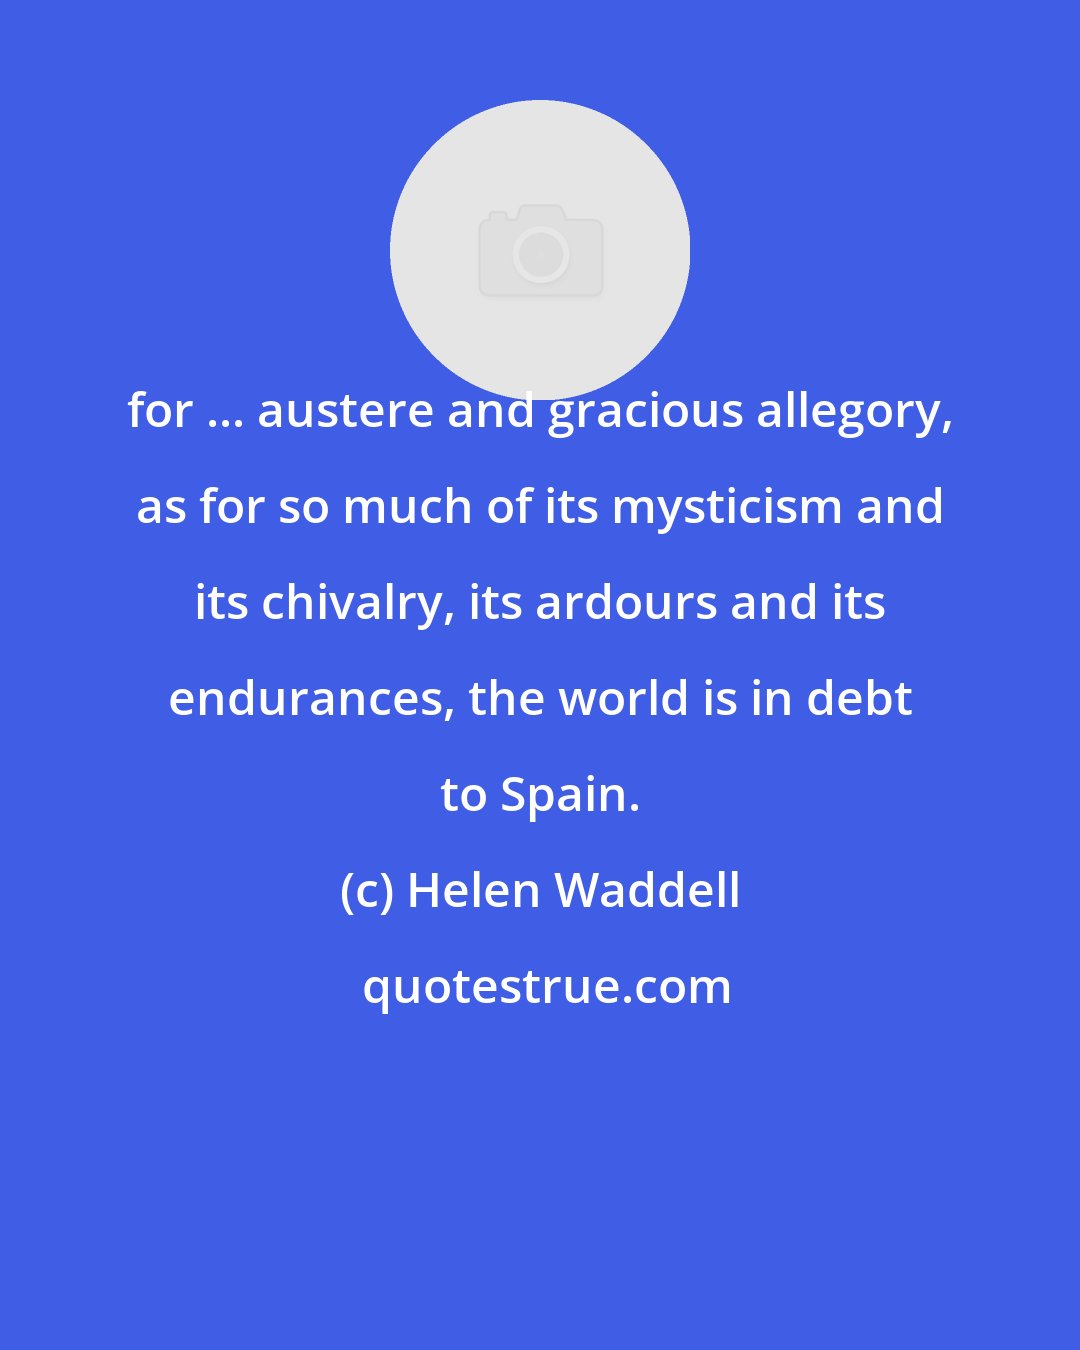 Helen Waddell: for ... austere and gracious allegory, as for so much of its mysticism and its chivalry, its ardours and its endurances, the world is in debt to Spain.